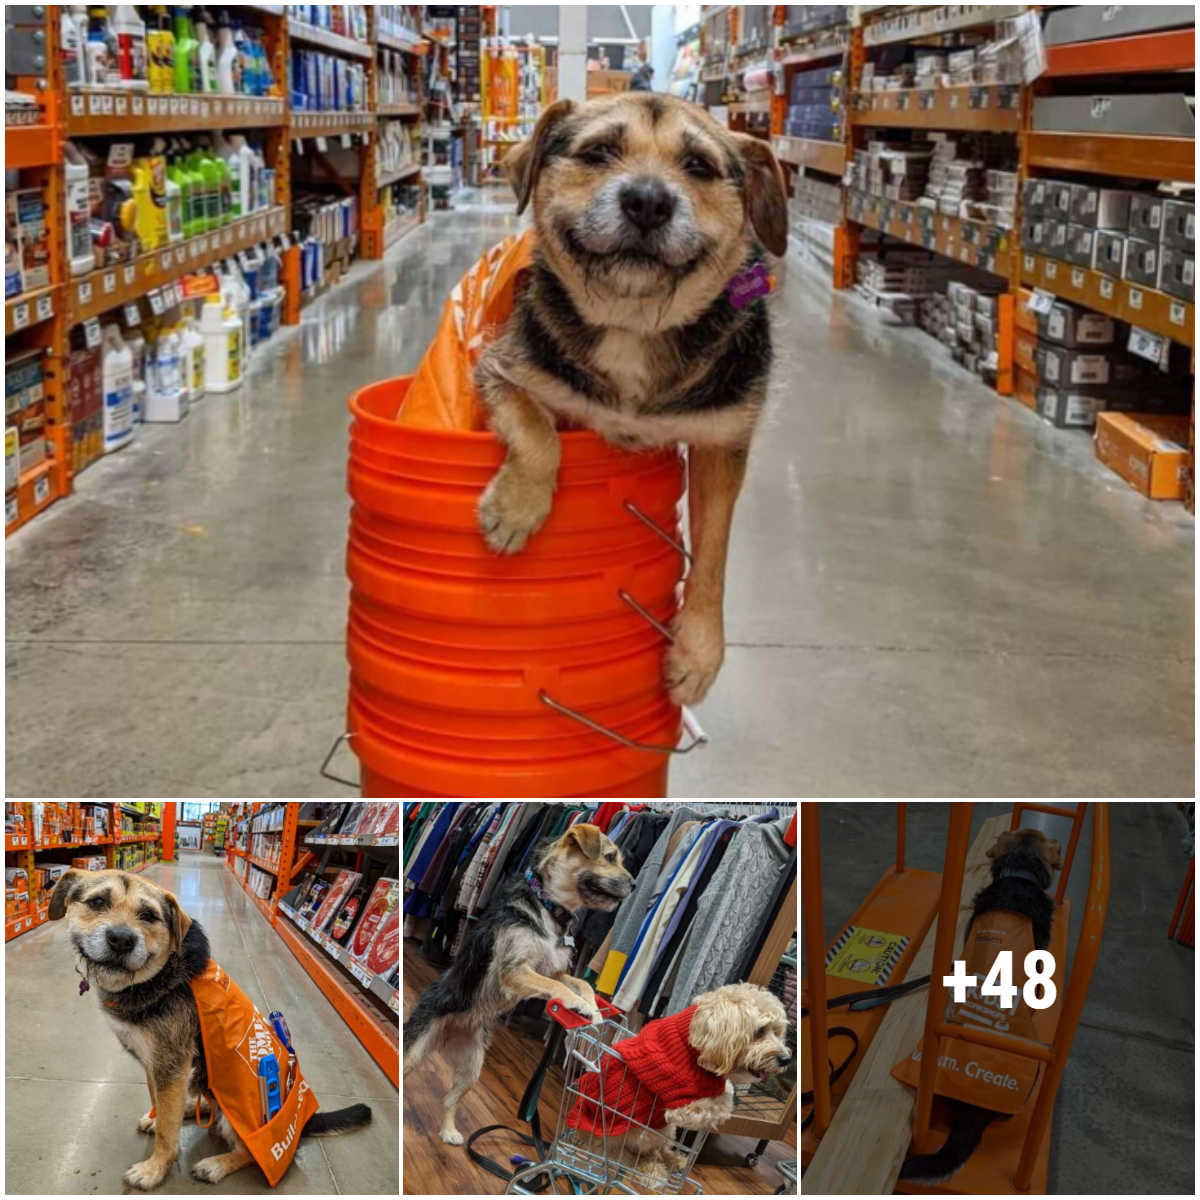 Introducing Heaven, the cutest and most customer-pleasing employee dog ever!